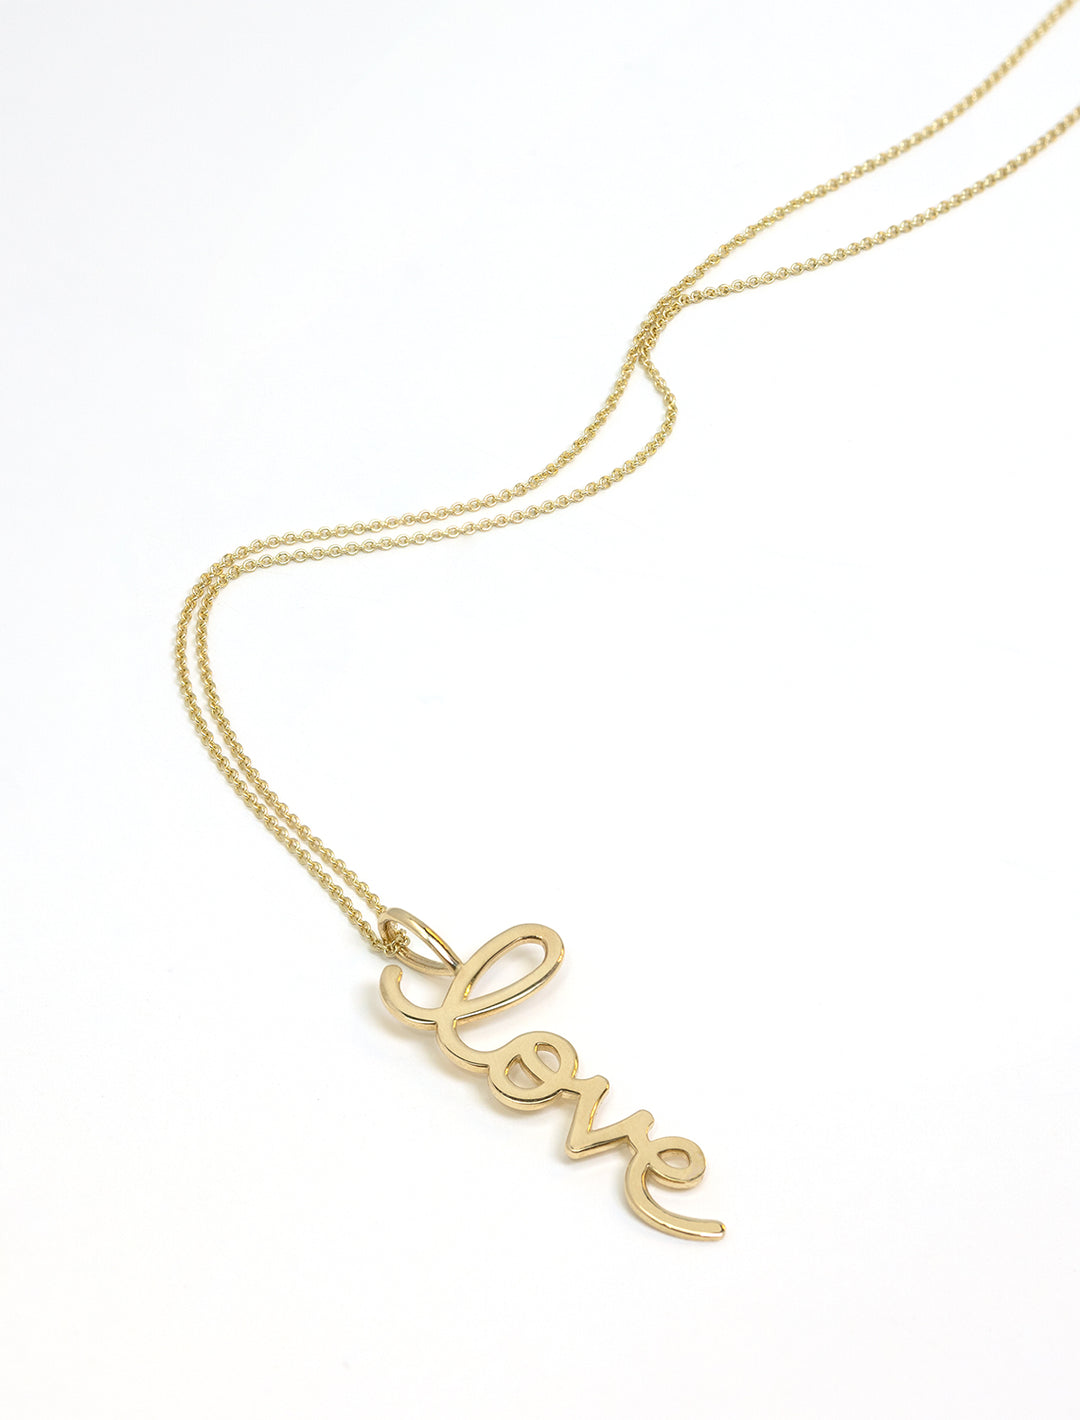 Stylized laydown of Sydney Evan's Large Pure Love Charm Necklace.